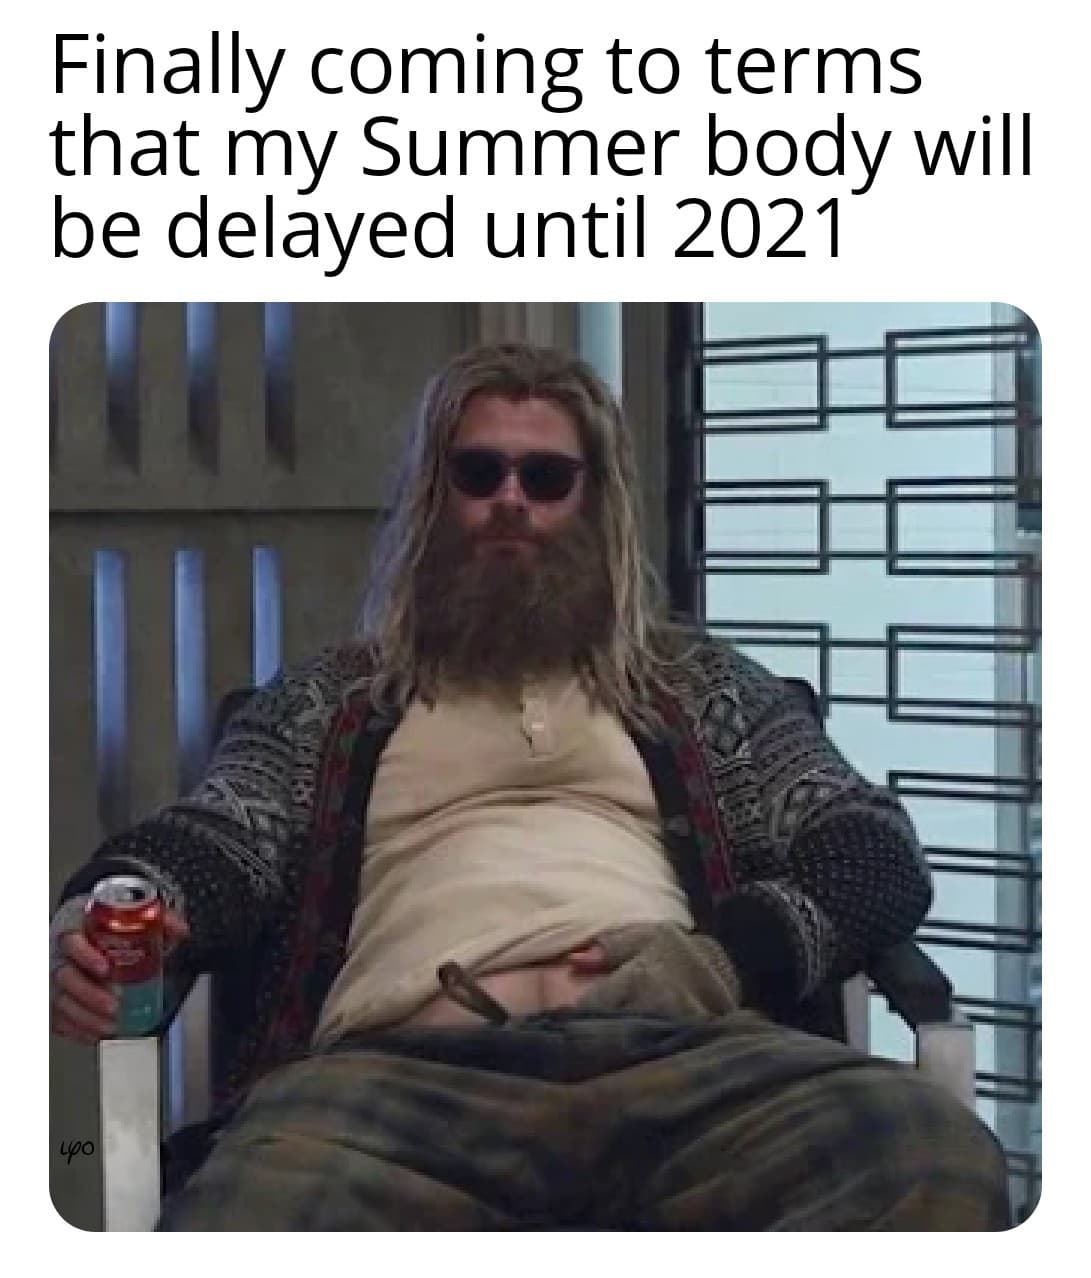 fat thor - Finally coming to terms that my Summer body will be delayed until 2021 Lo